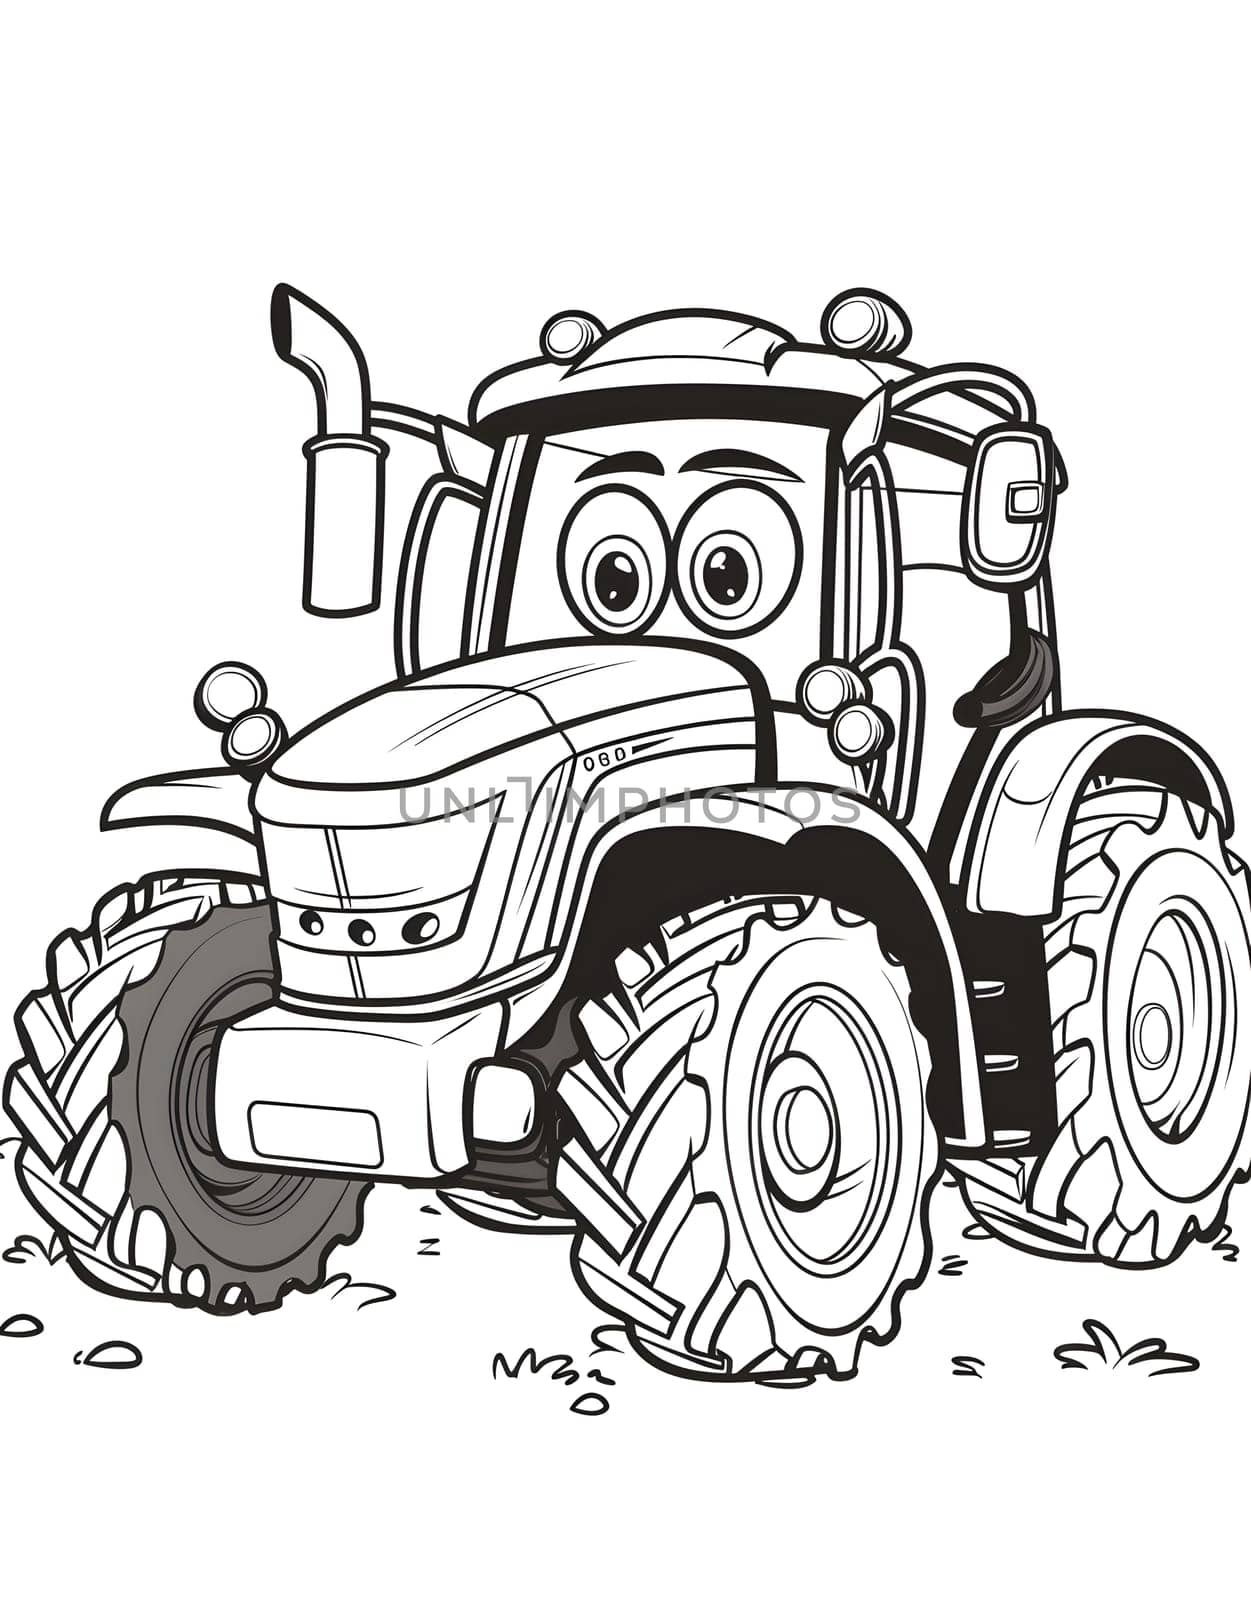 A monochrome illustration of a motor vehicle featuring a largewheeled tractor. The artwork showcases automotive design with detailed wheel and exterior painting